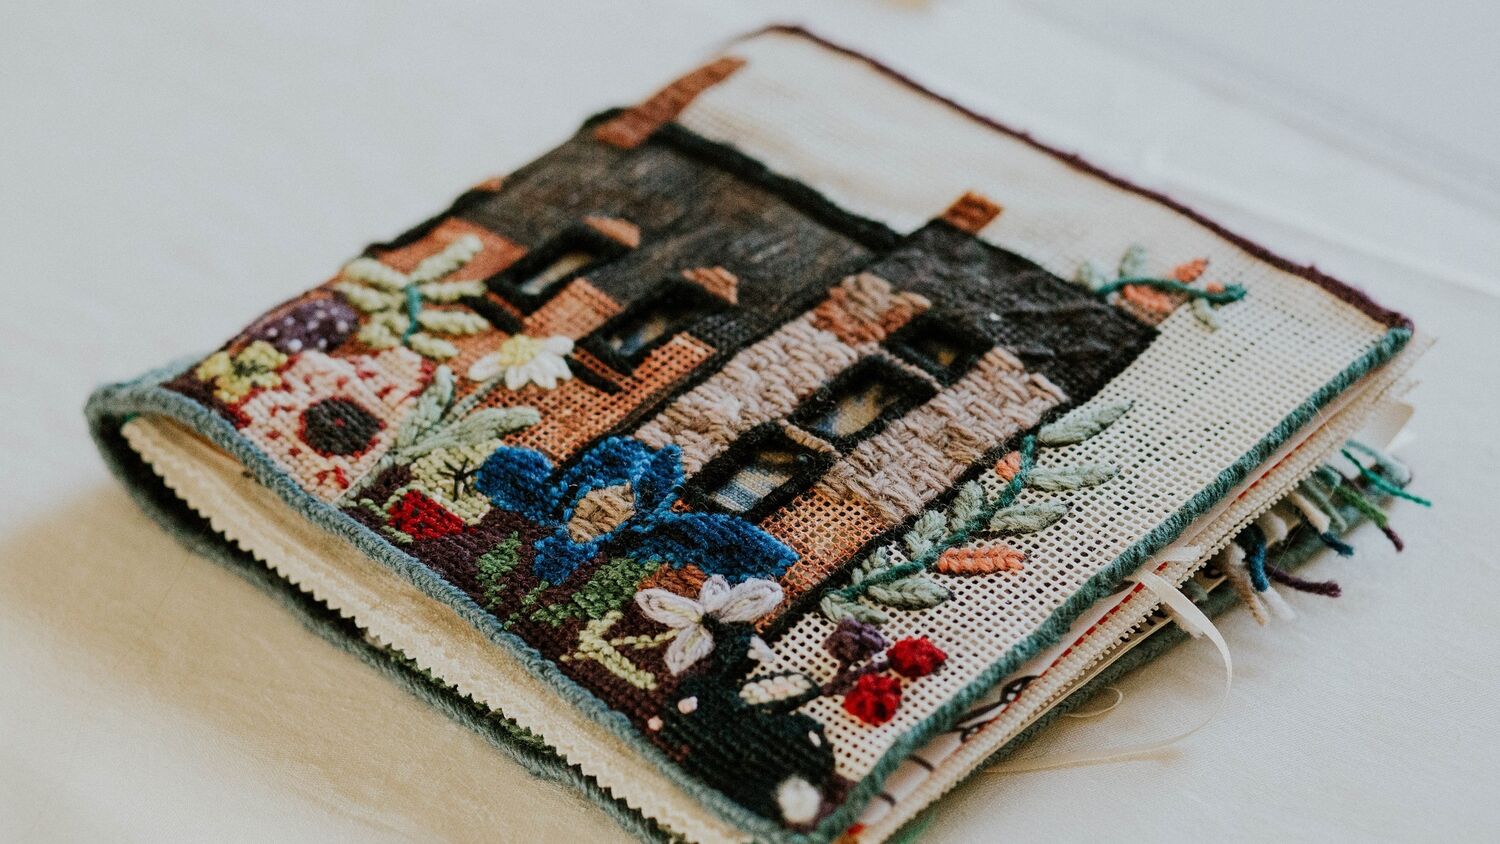 A fabric book is displayed against a plain grey background. The front cover is a tapestry of a castle with colourful flowers in the foreground.